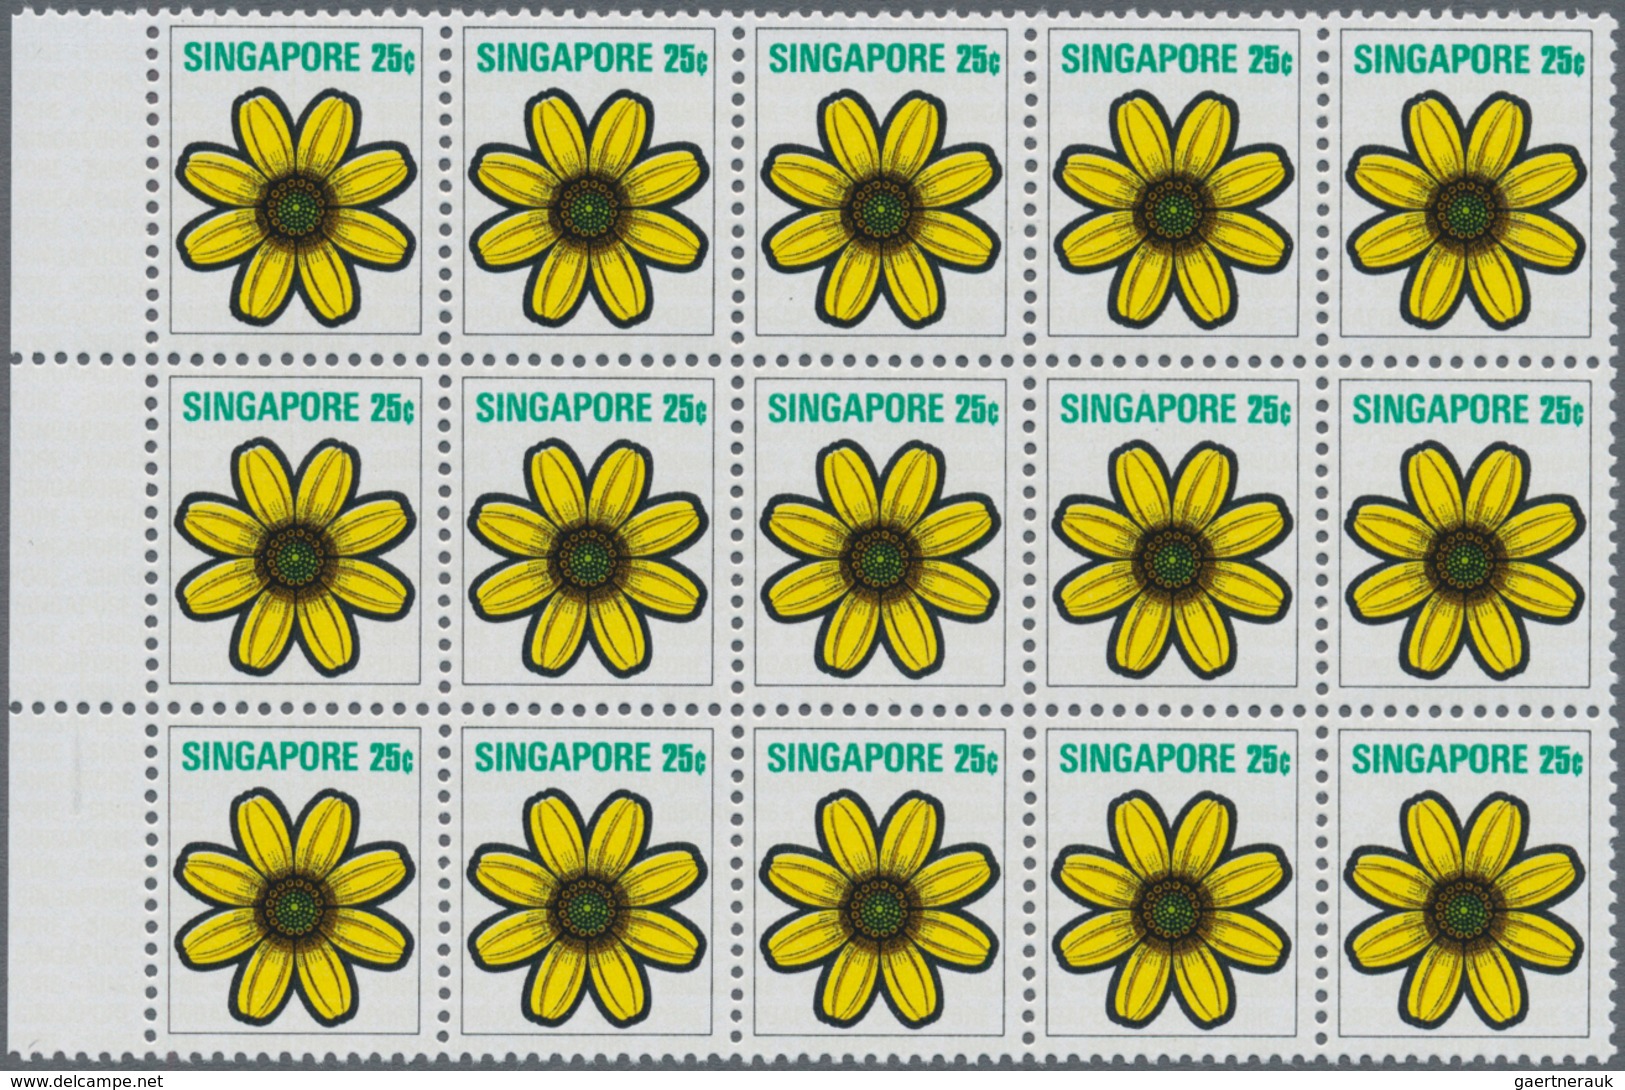 Singapur: 1973, Flowers and Fruits defintives complete set of 13 in blocks of 15, mint never hinged,